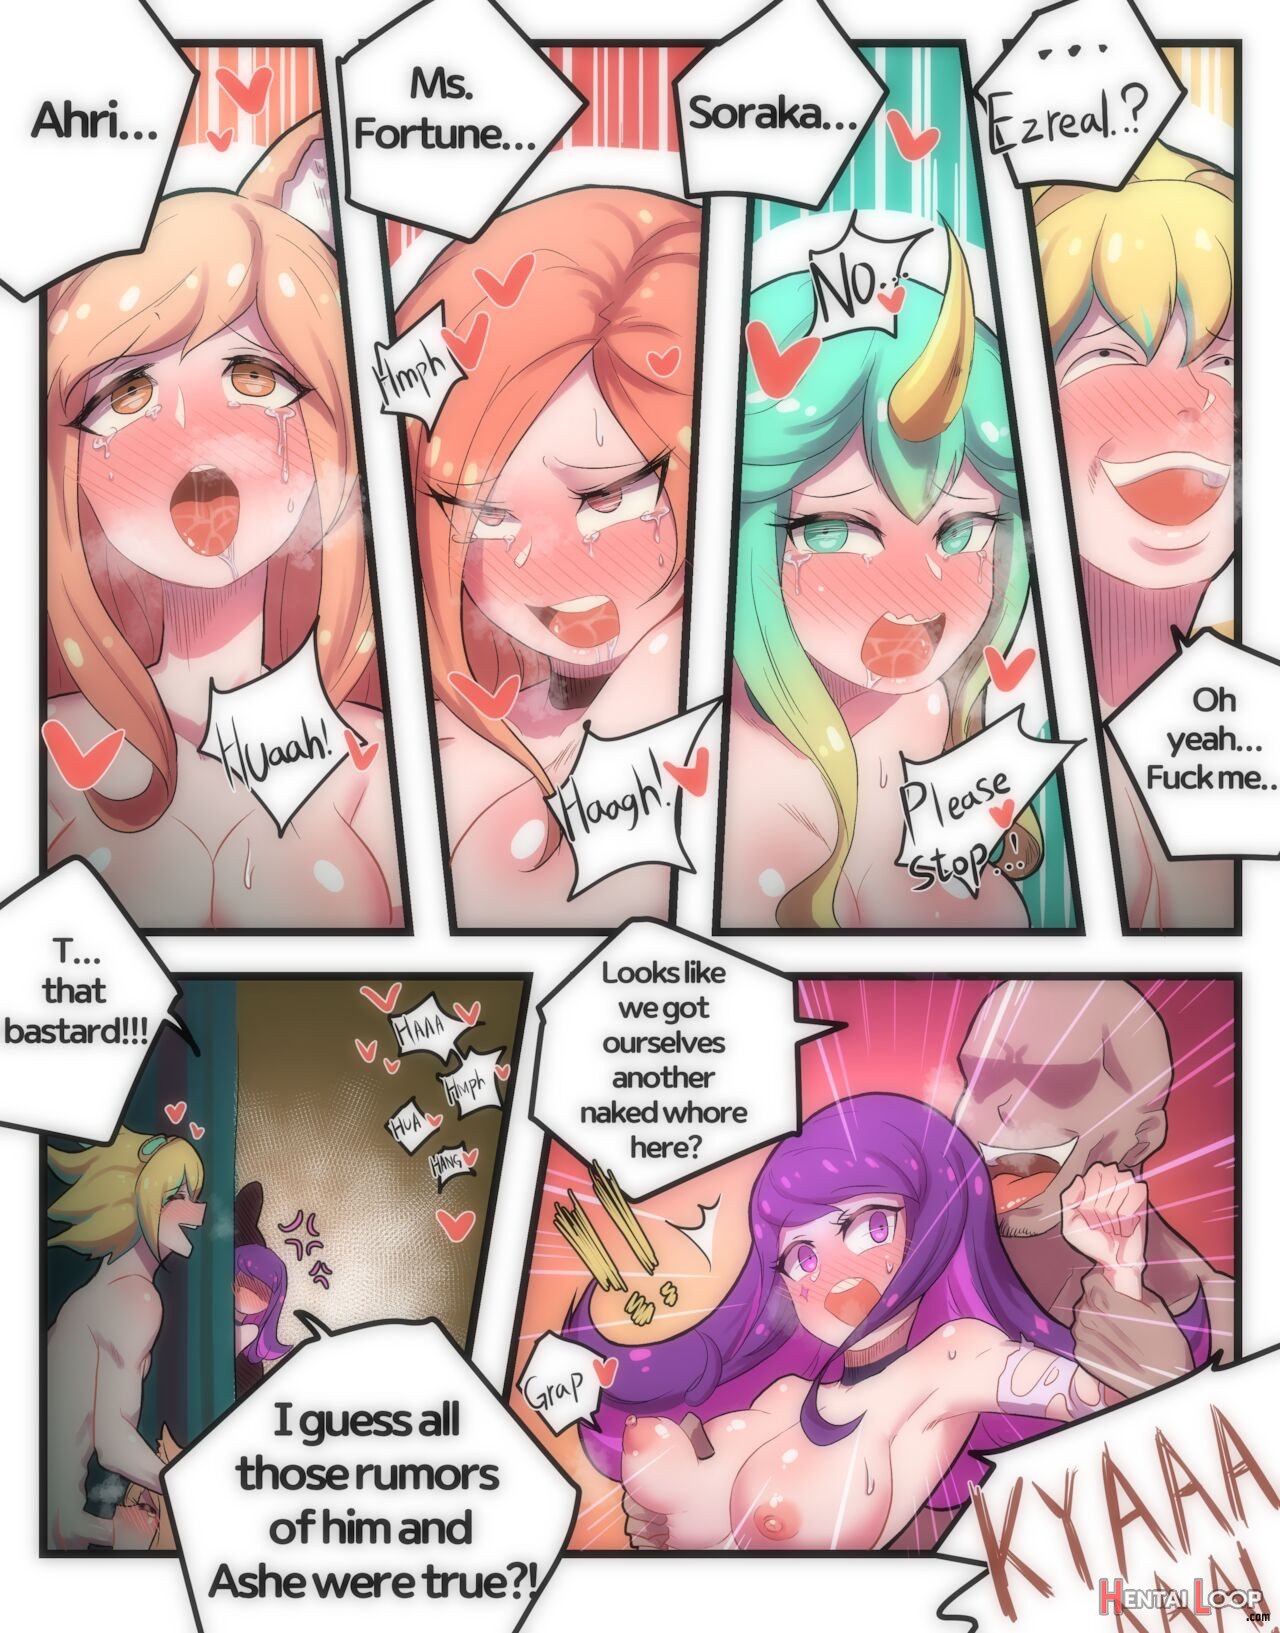 How To Train Your Star Guardian page 6